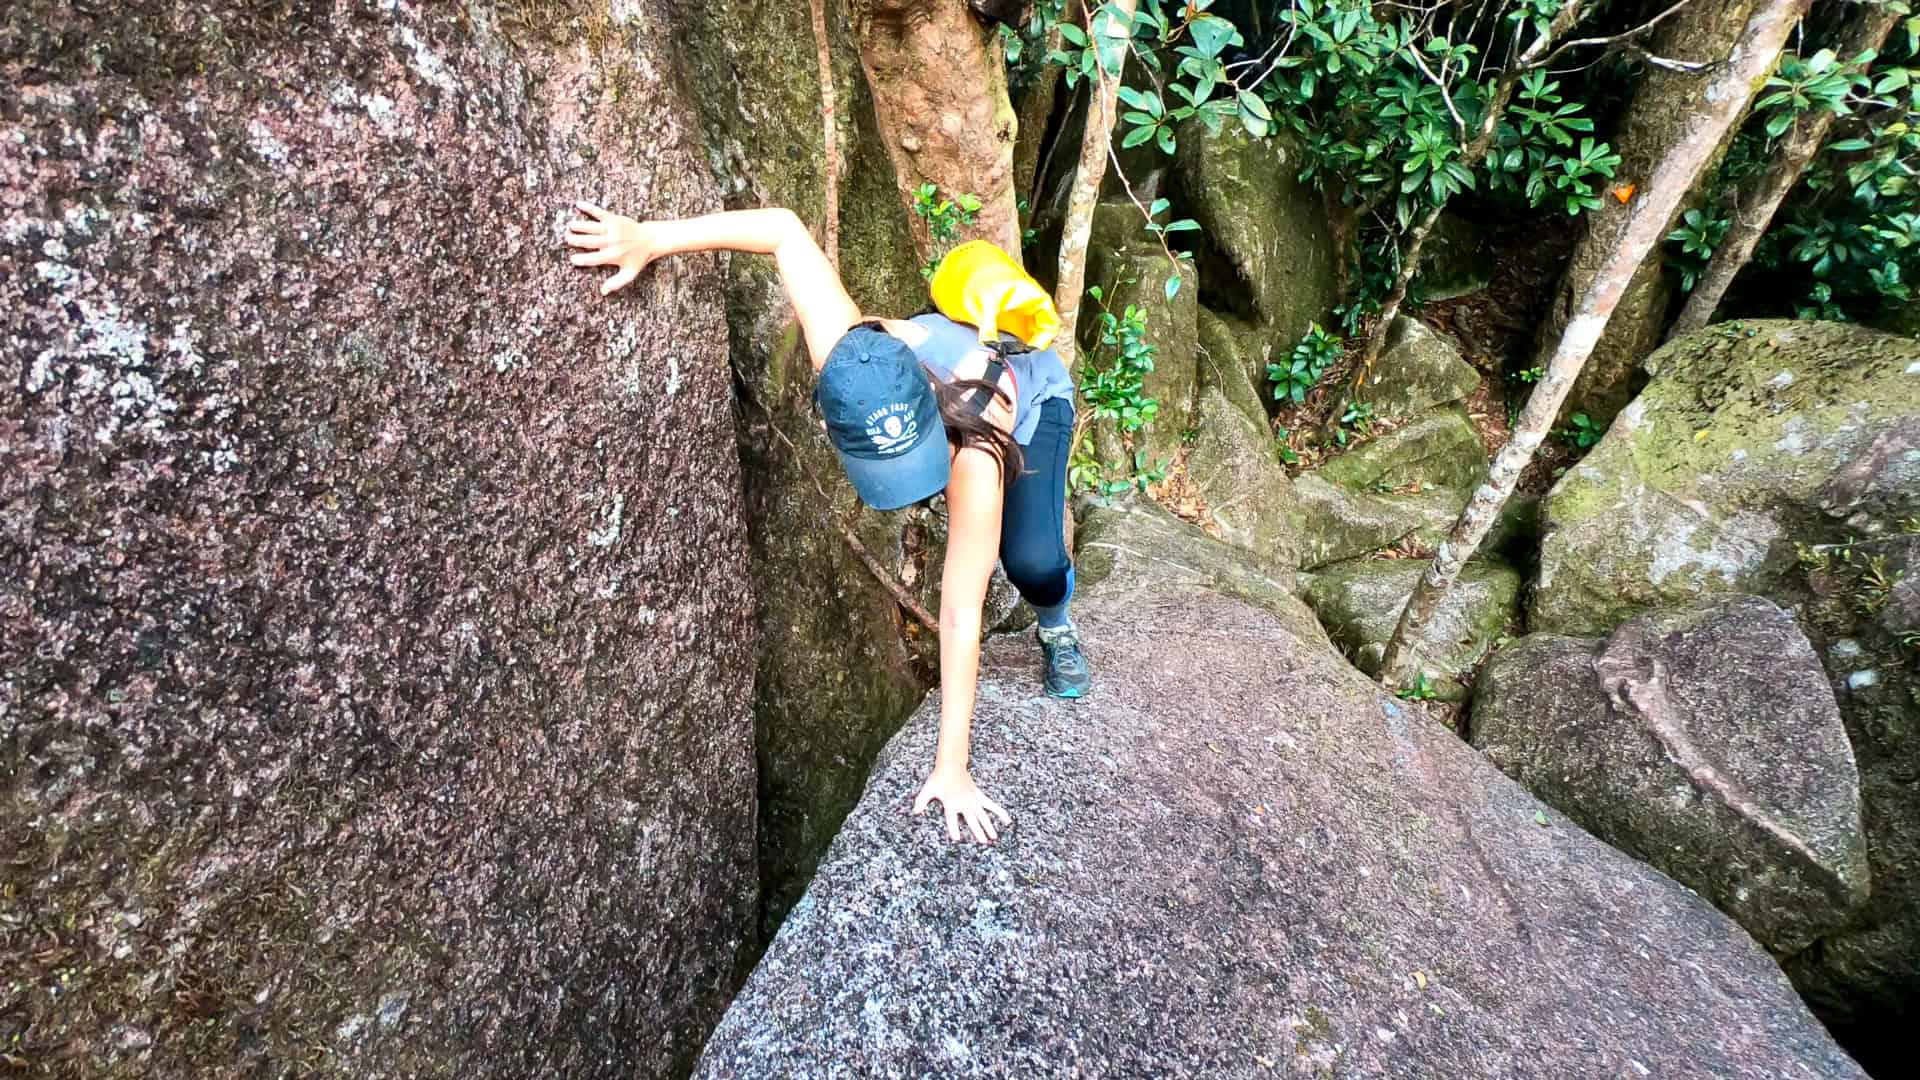 Climbing over boulders along the Western Trail at Mount Bartle Frere, Queensland, Australia // Travel Mermaid